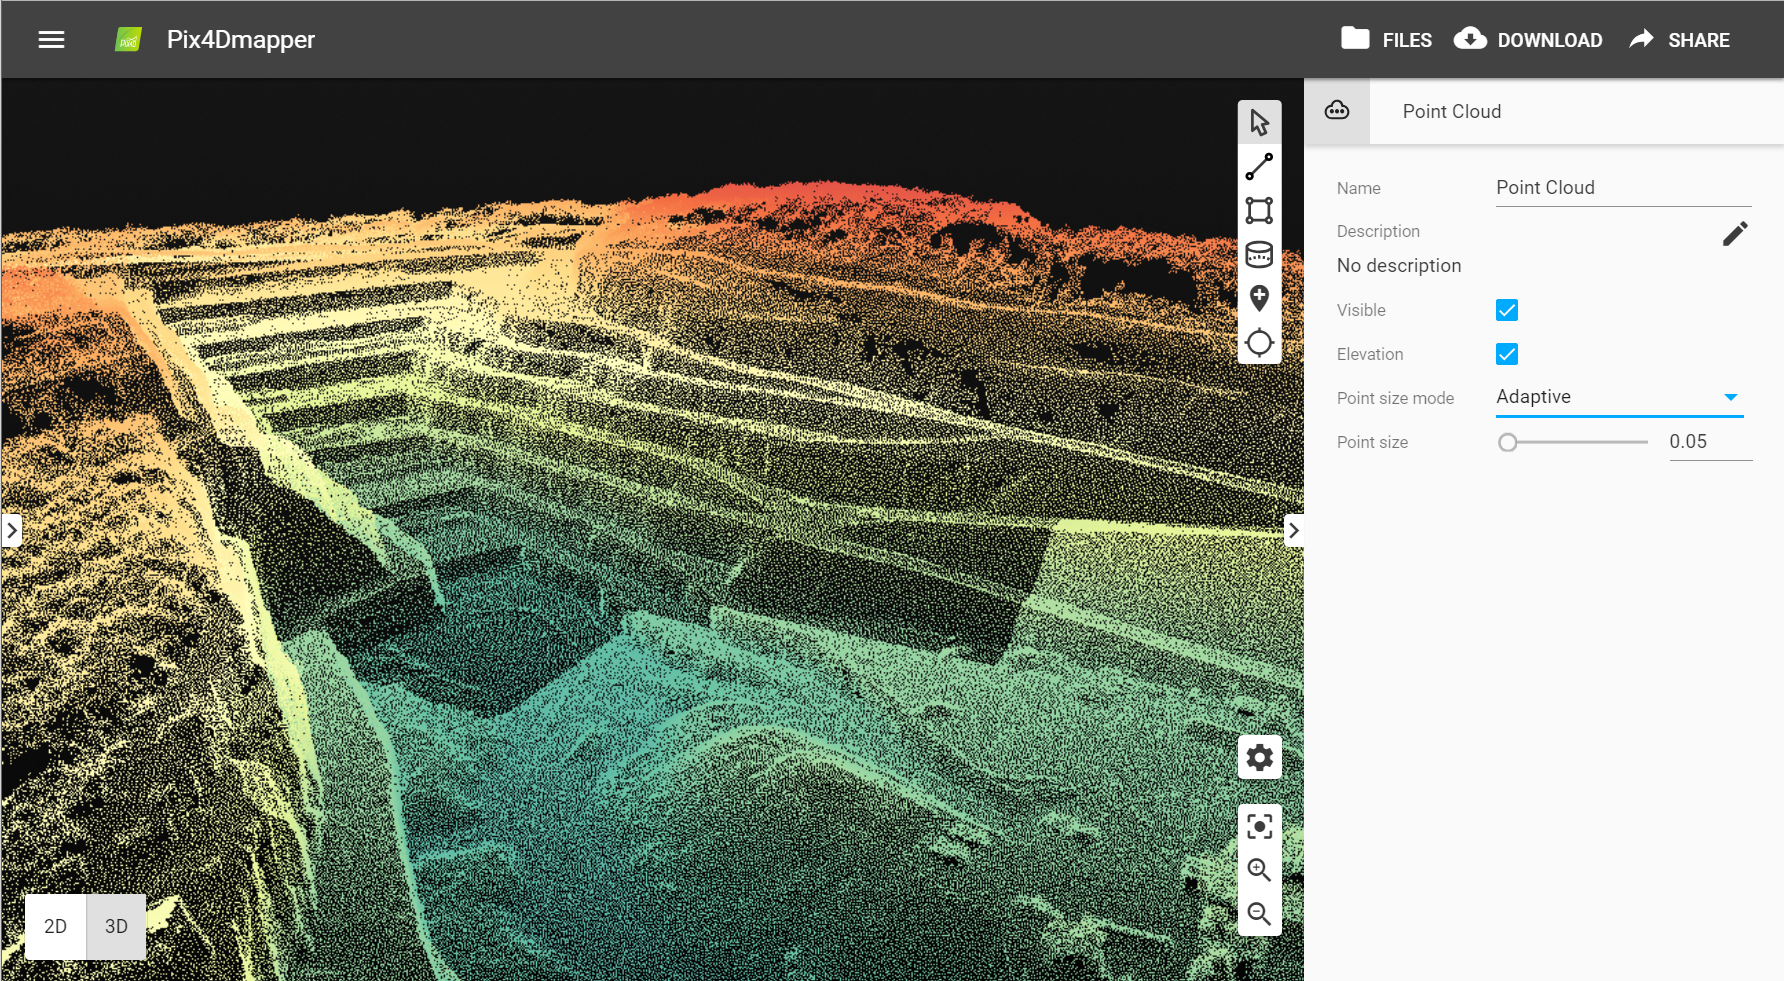 The new elevation point cloud color scale